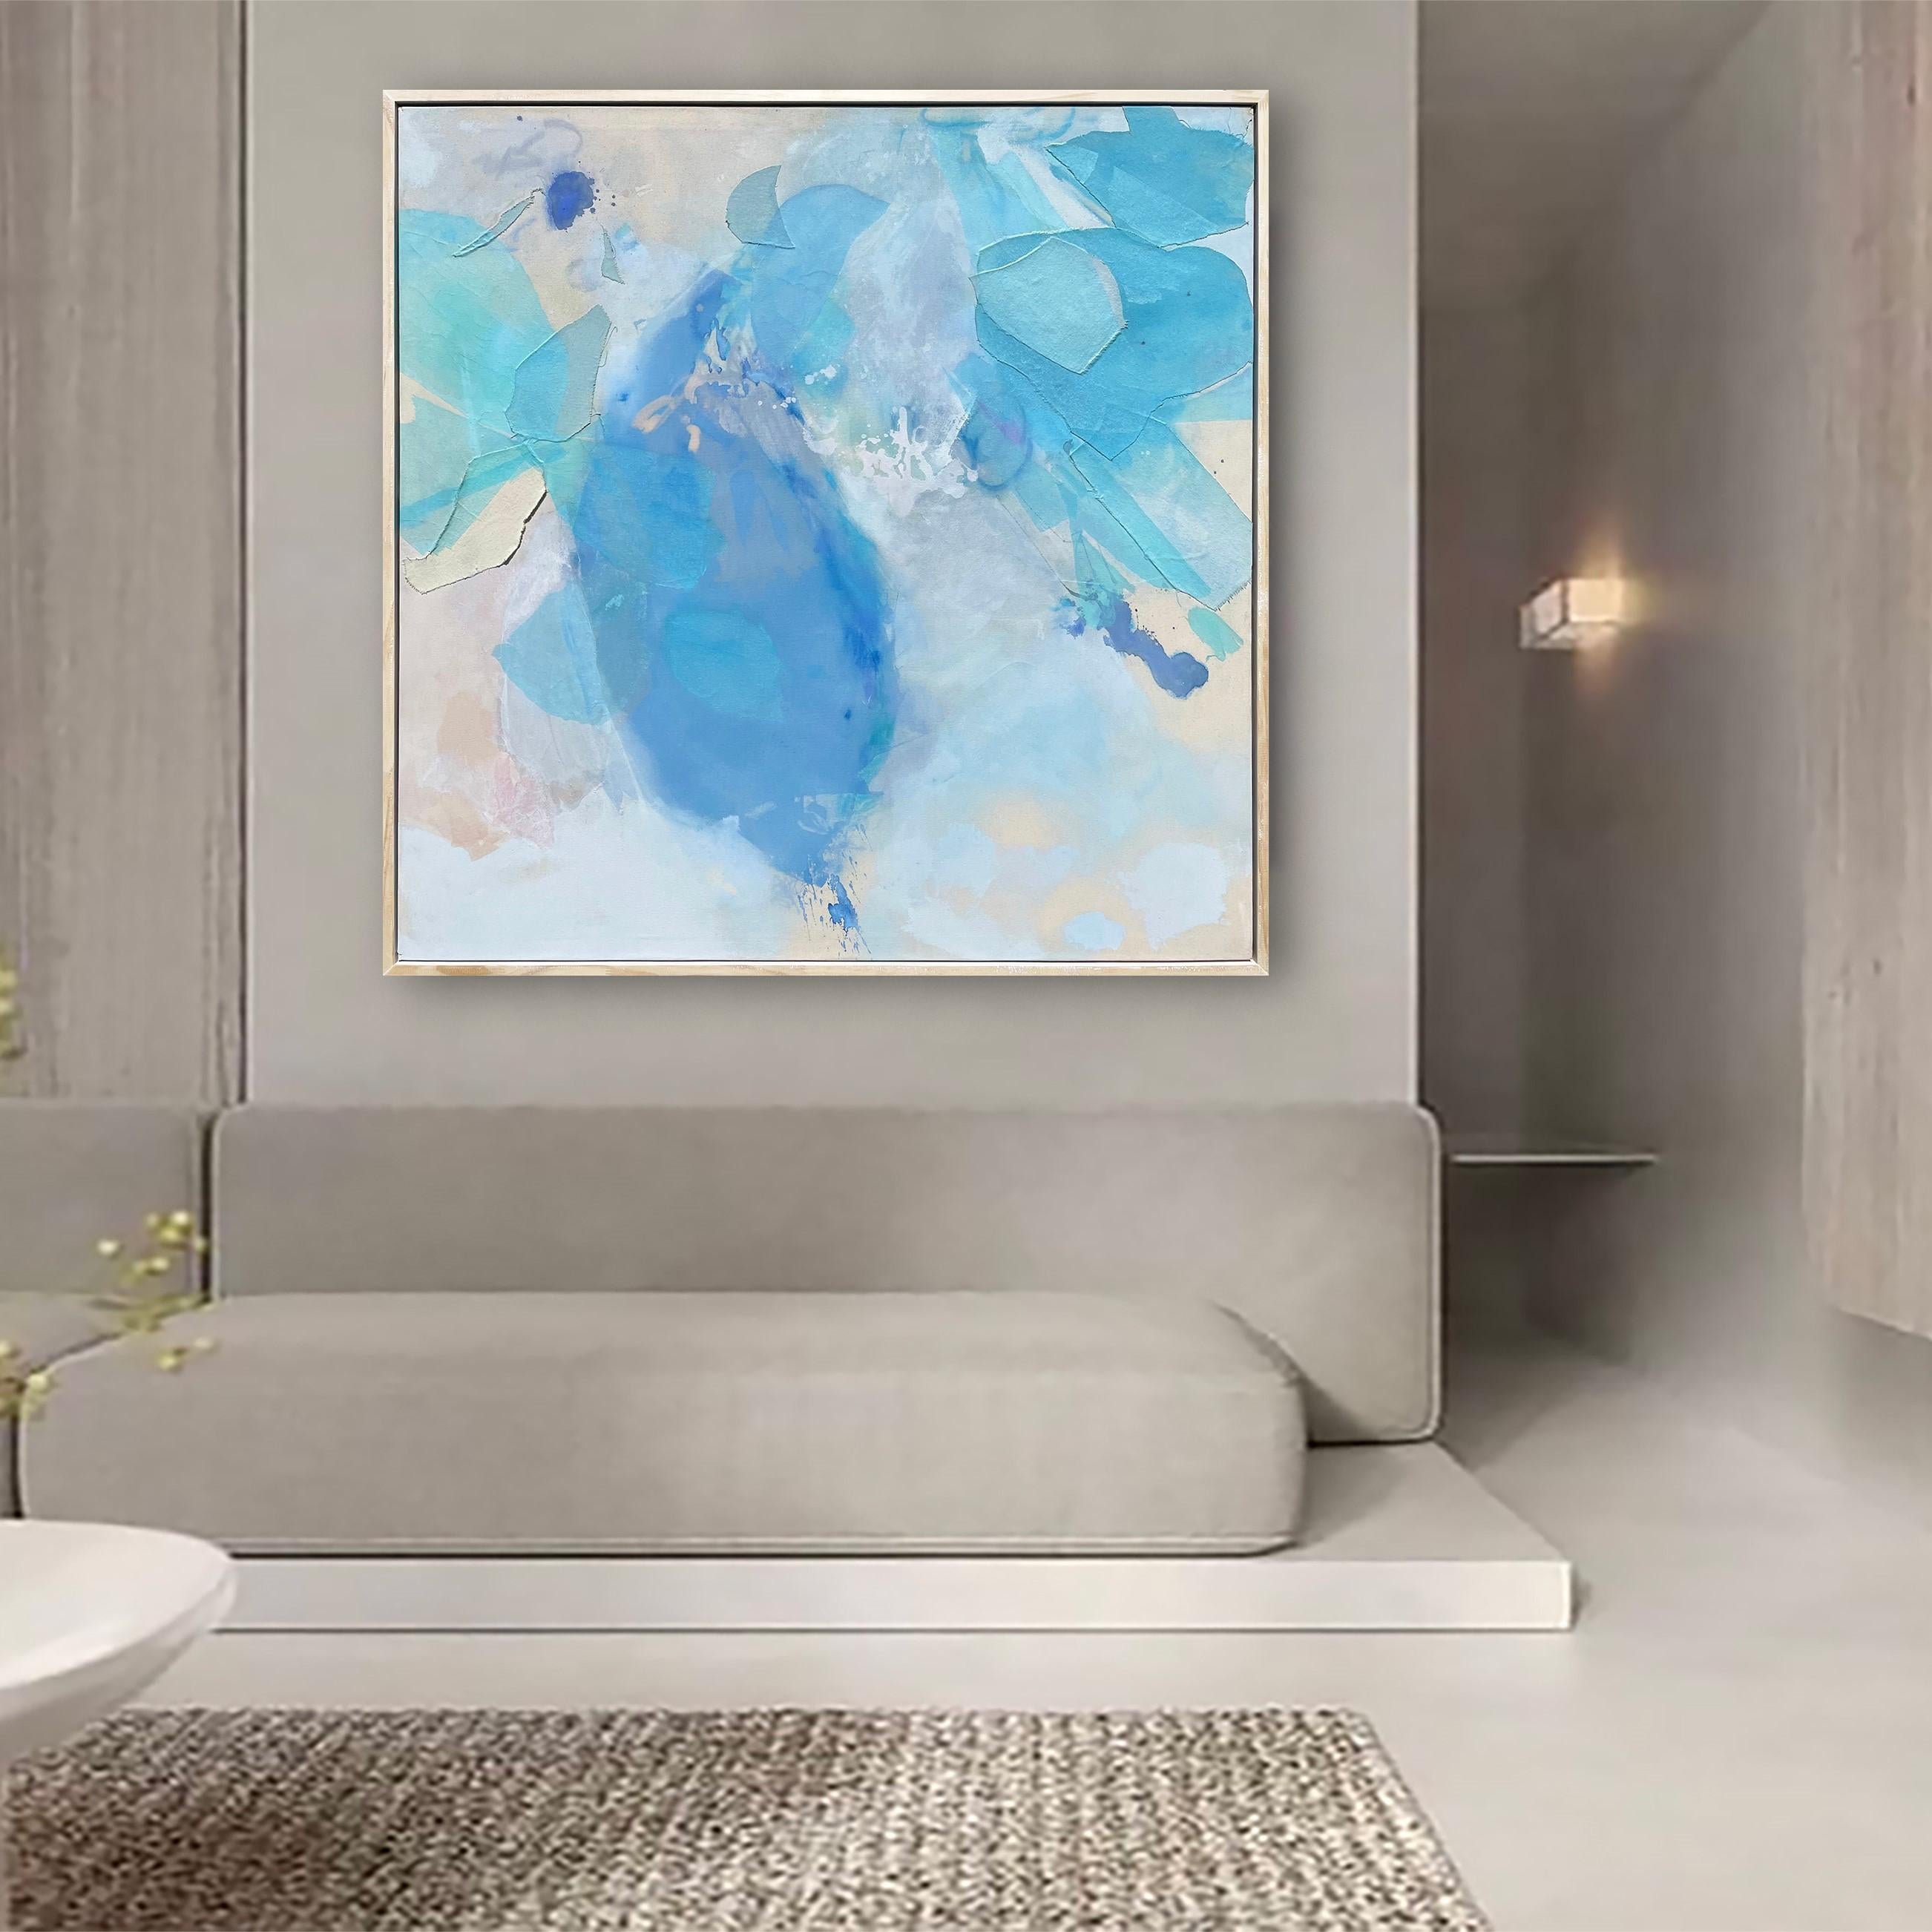 Rhythm of the Rain, Original Framed Blue Abstract Mixed Media Collage Painting
48x48x2 (HxWxD), Mixed Media

A peaceful color palette of blues and creams spill together in this square format work by artist Stacey Warnix. This piece is a strong